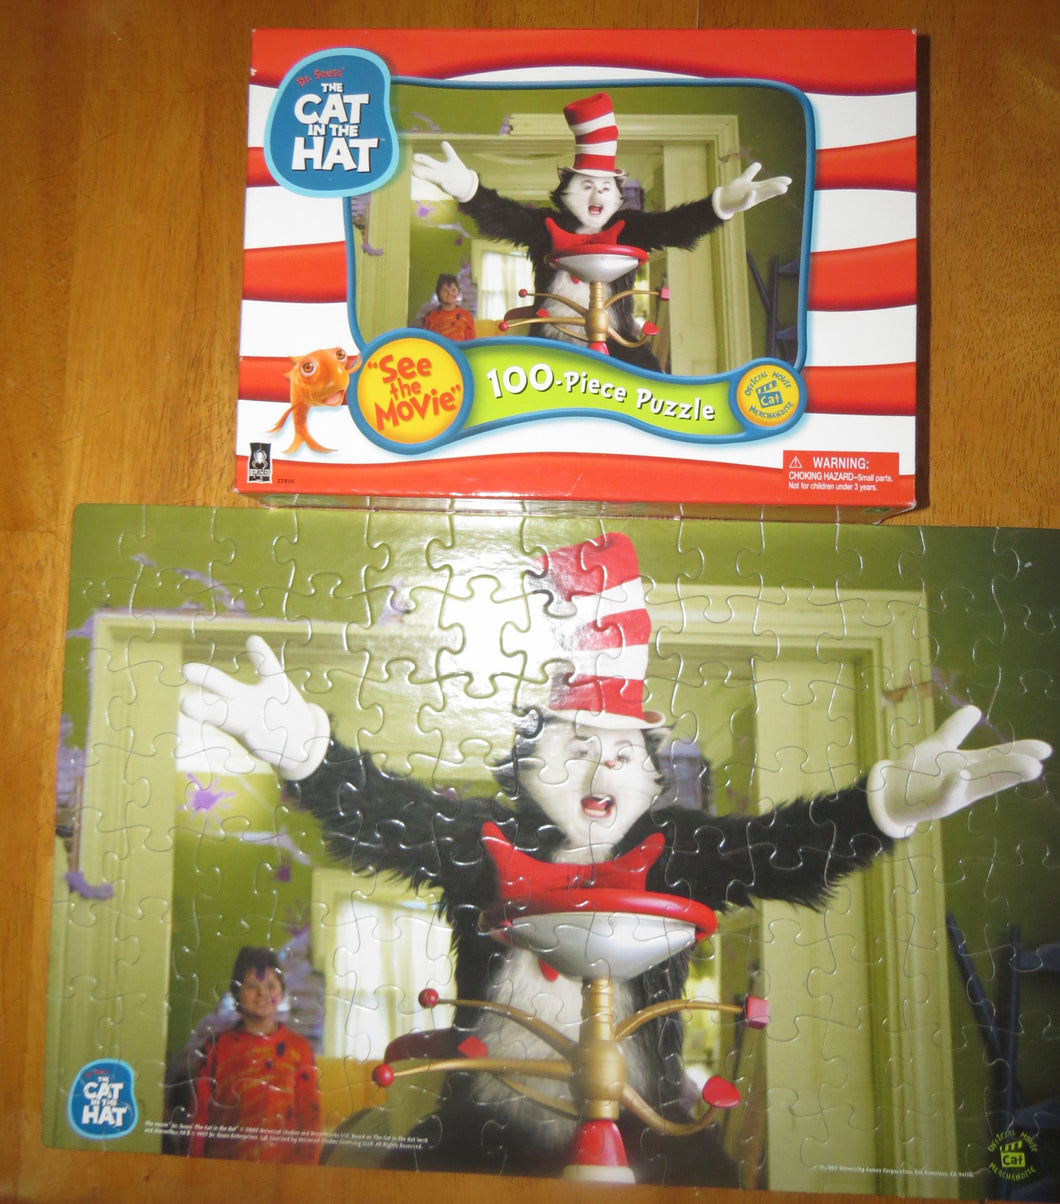 CAT IN THE HAT - 100 mcx puzzle complete w box